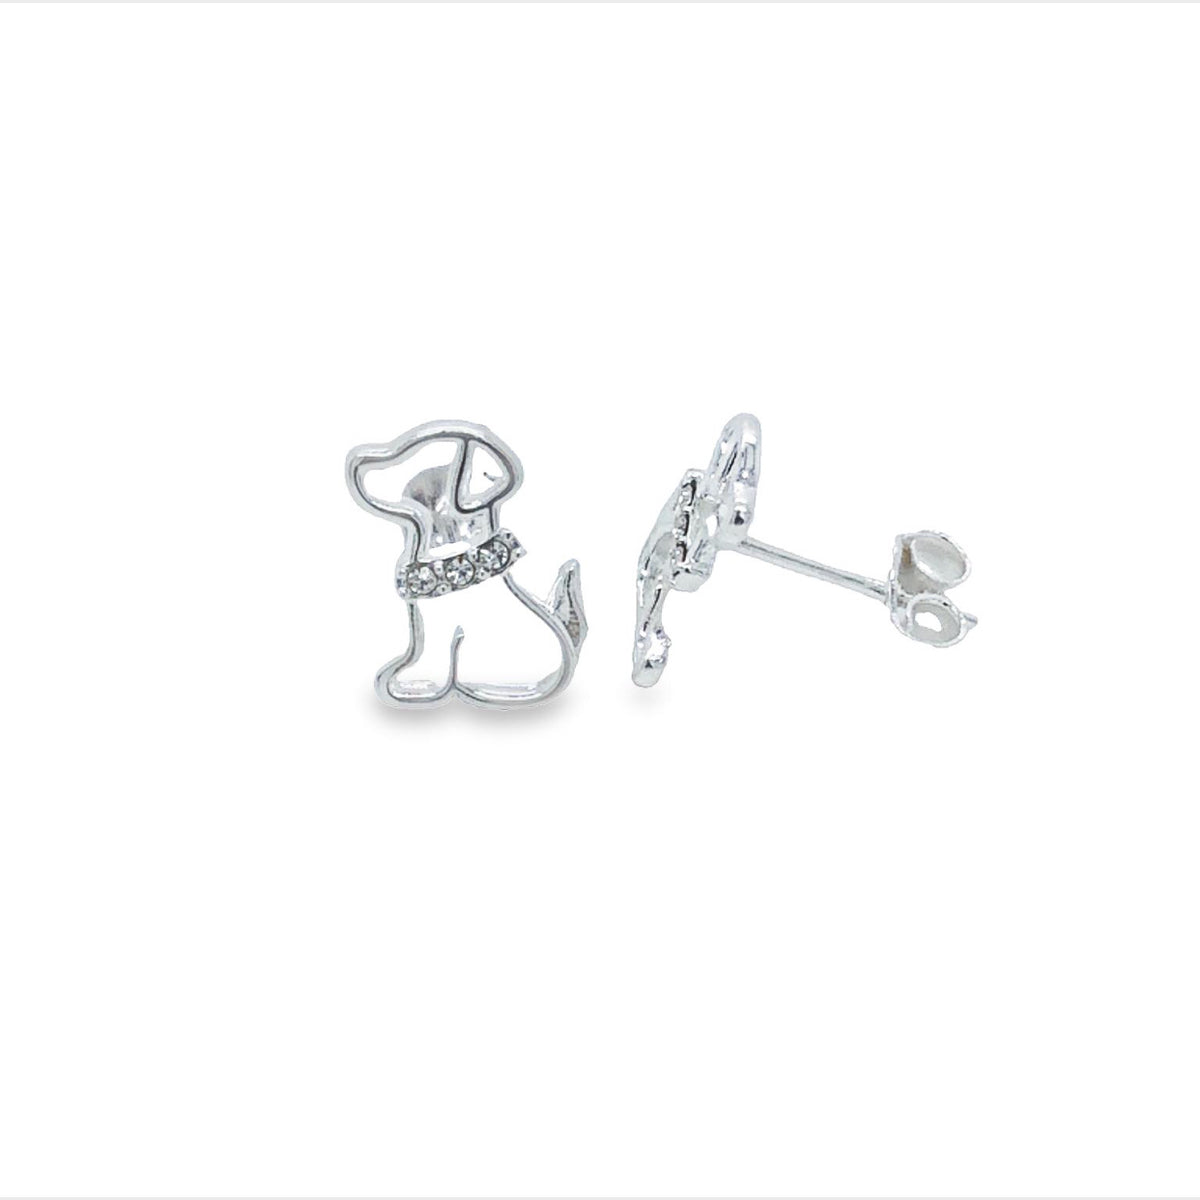 Silver Sitting Dog With Stone Set Collar Stud Earrings